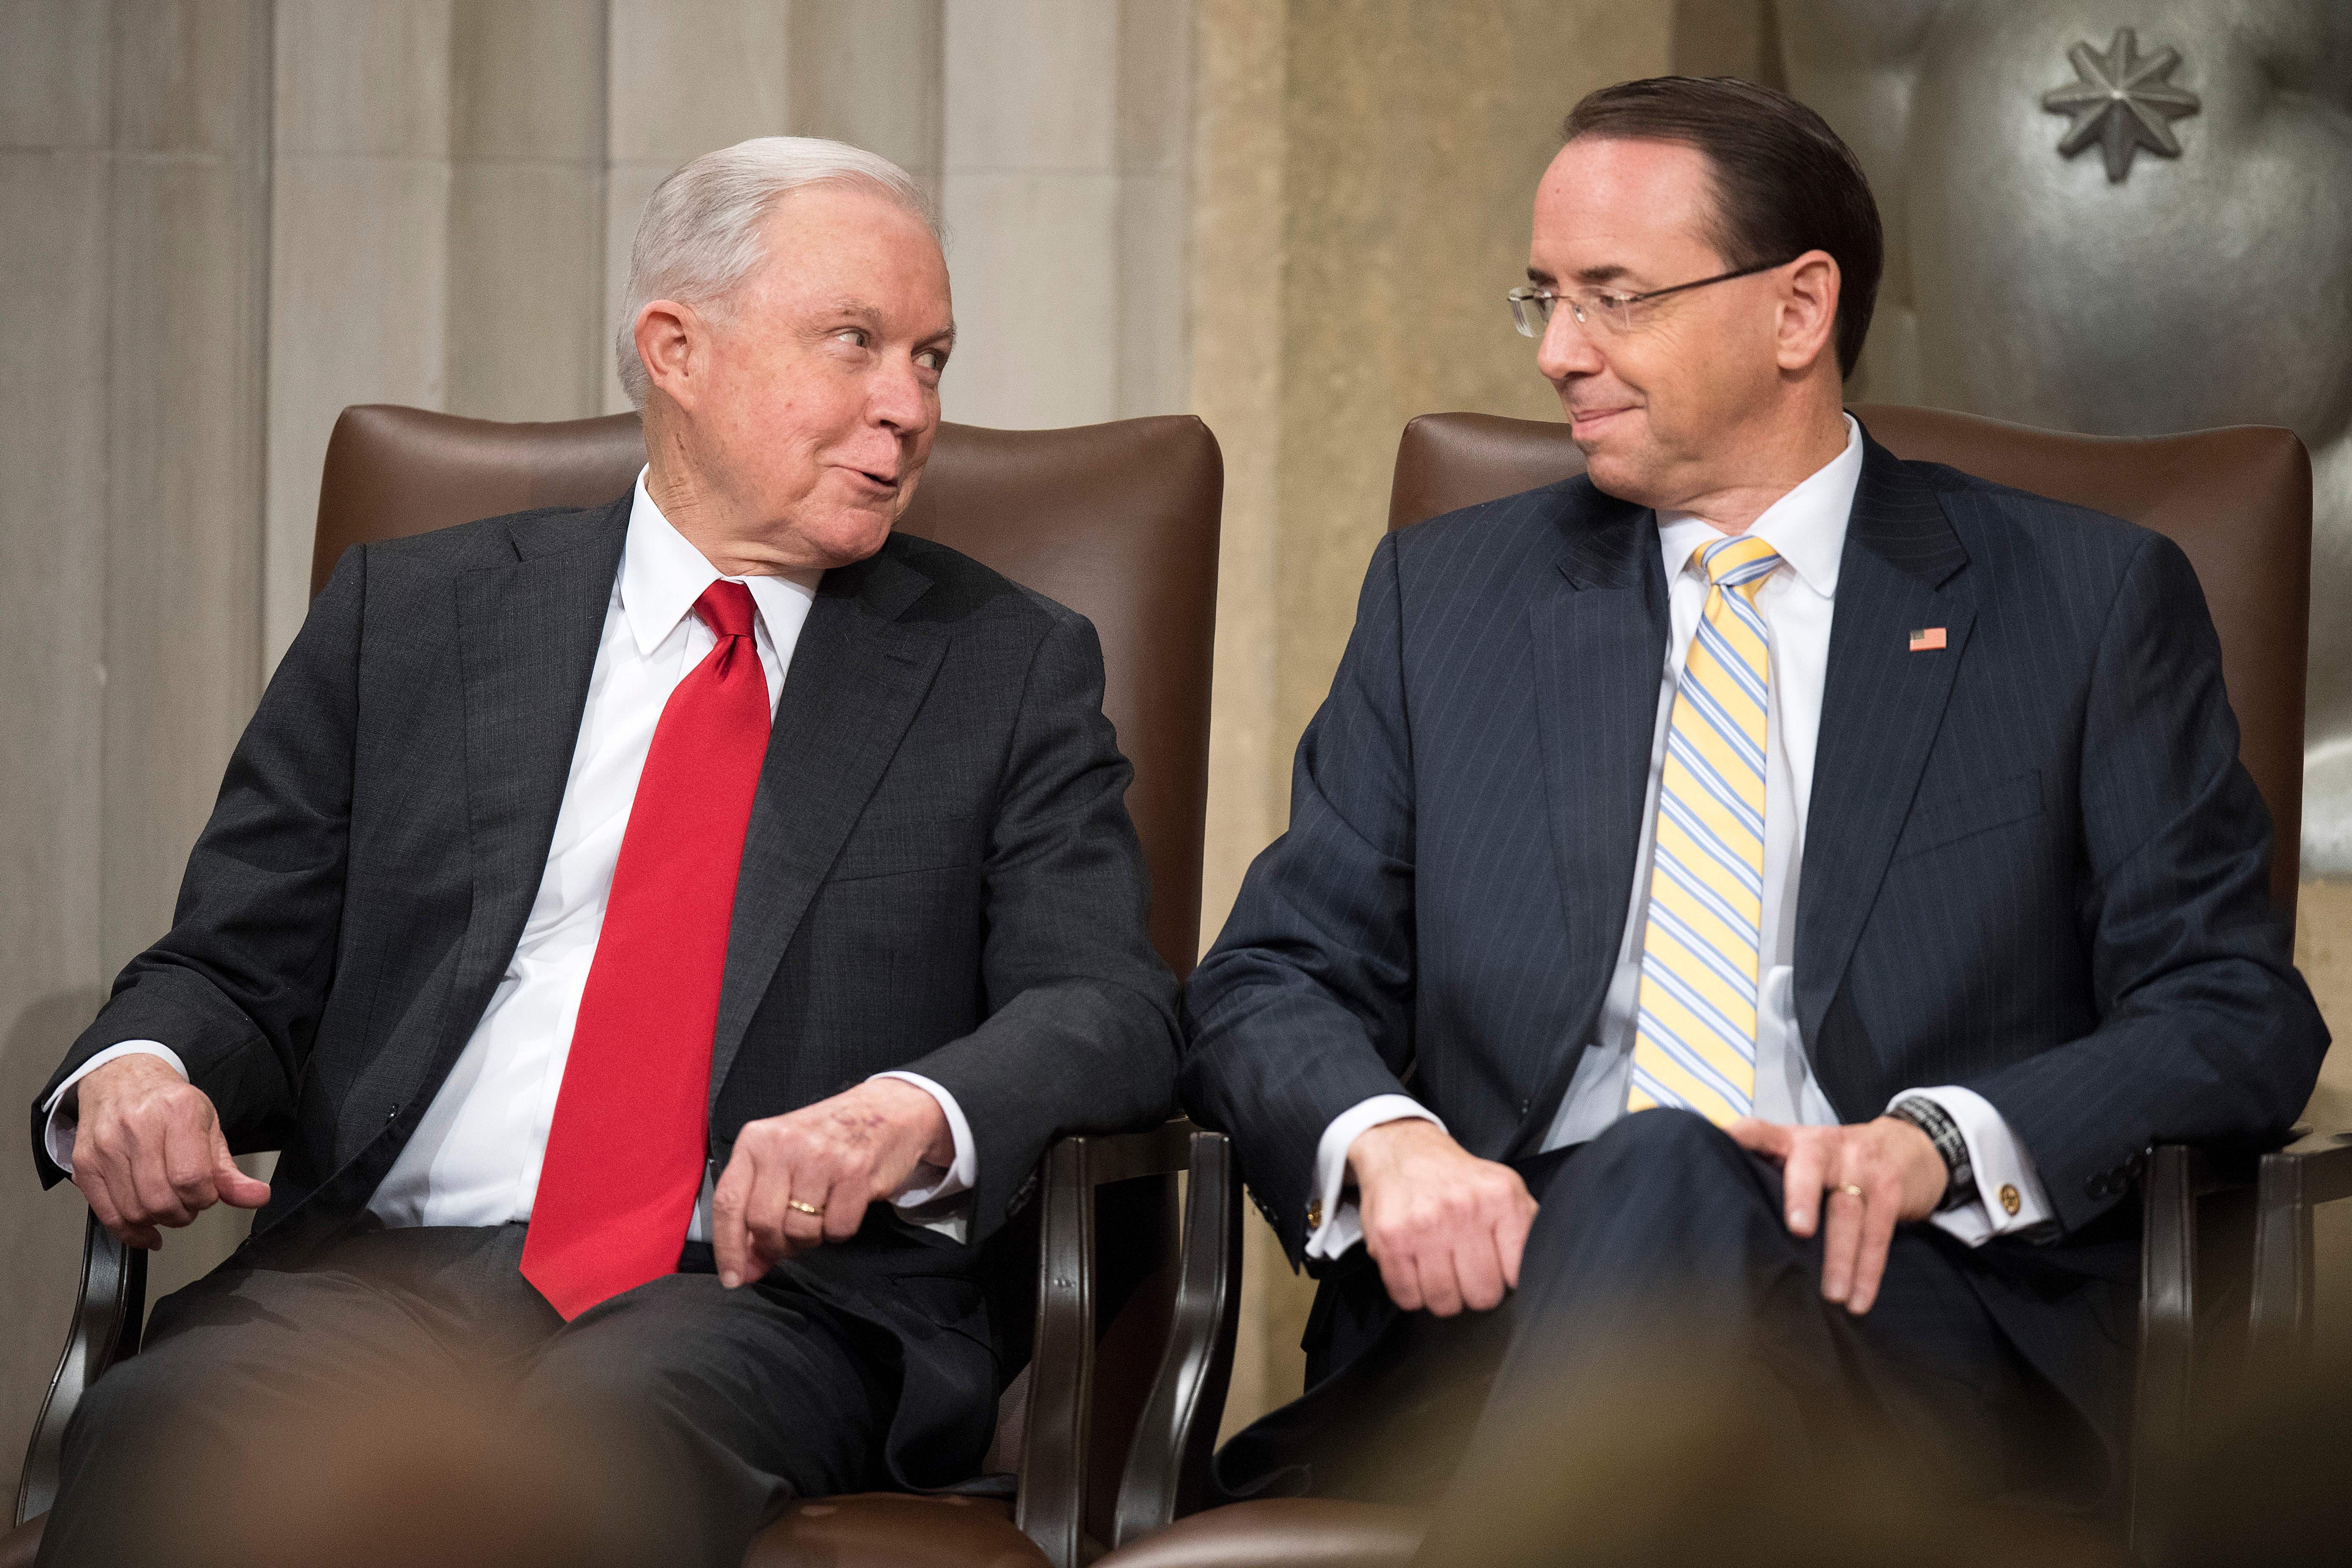 Jeff Sessions and Rod Rosenstein seated next to each other at an awards ceremony.